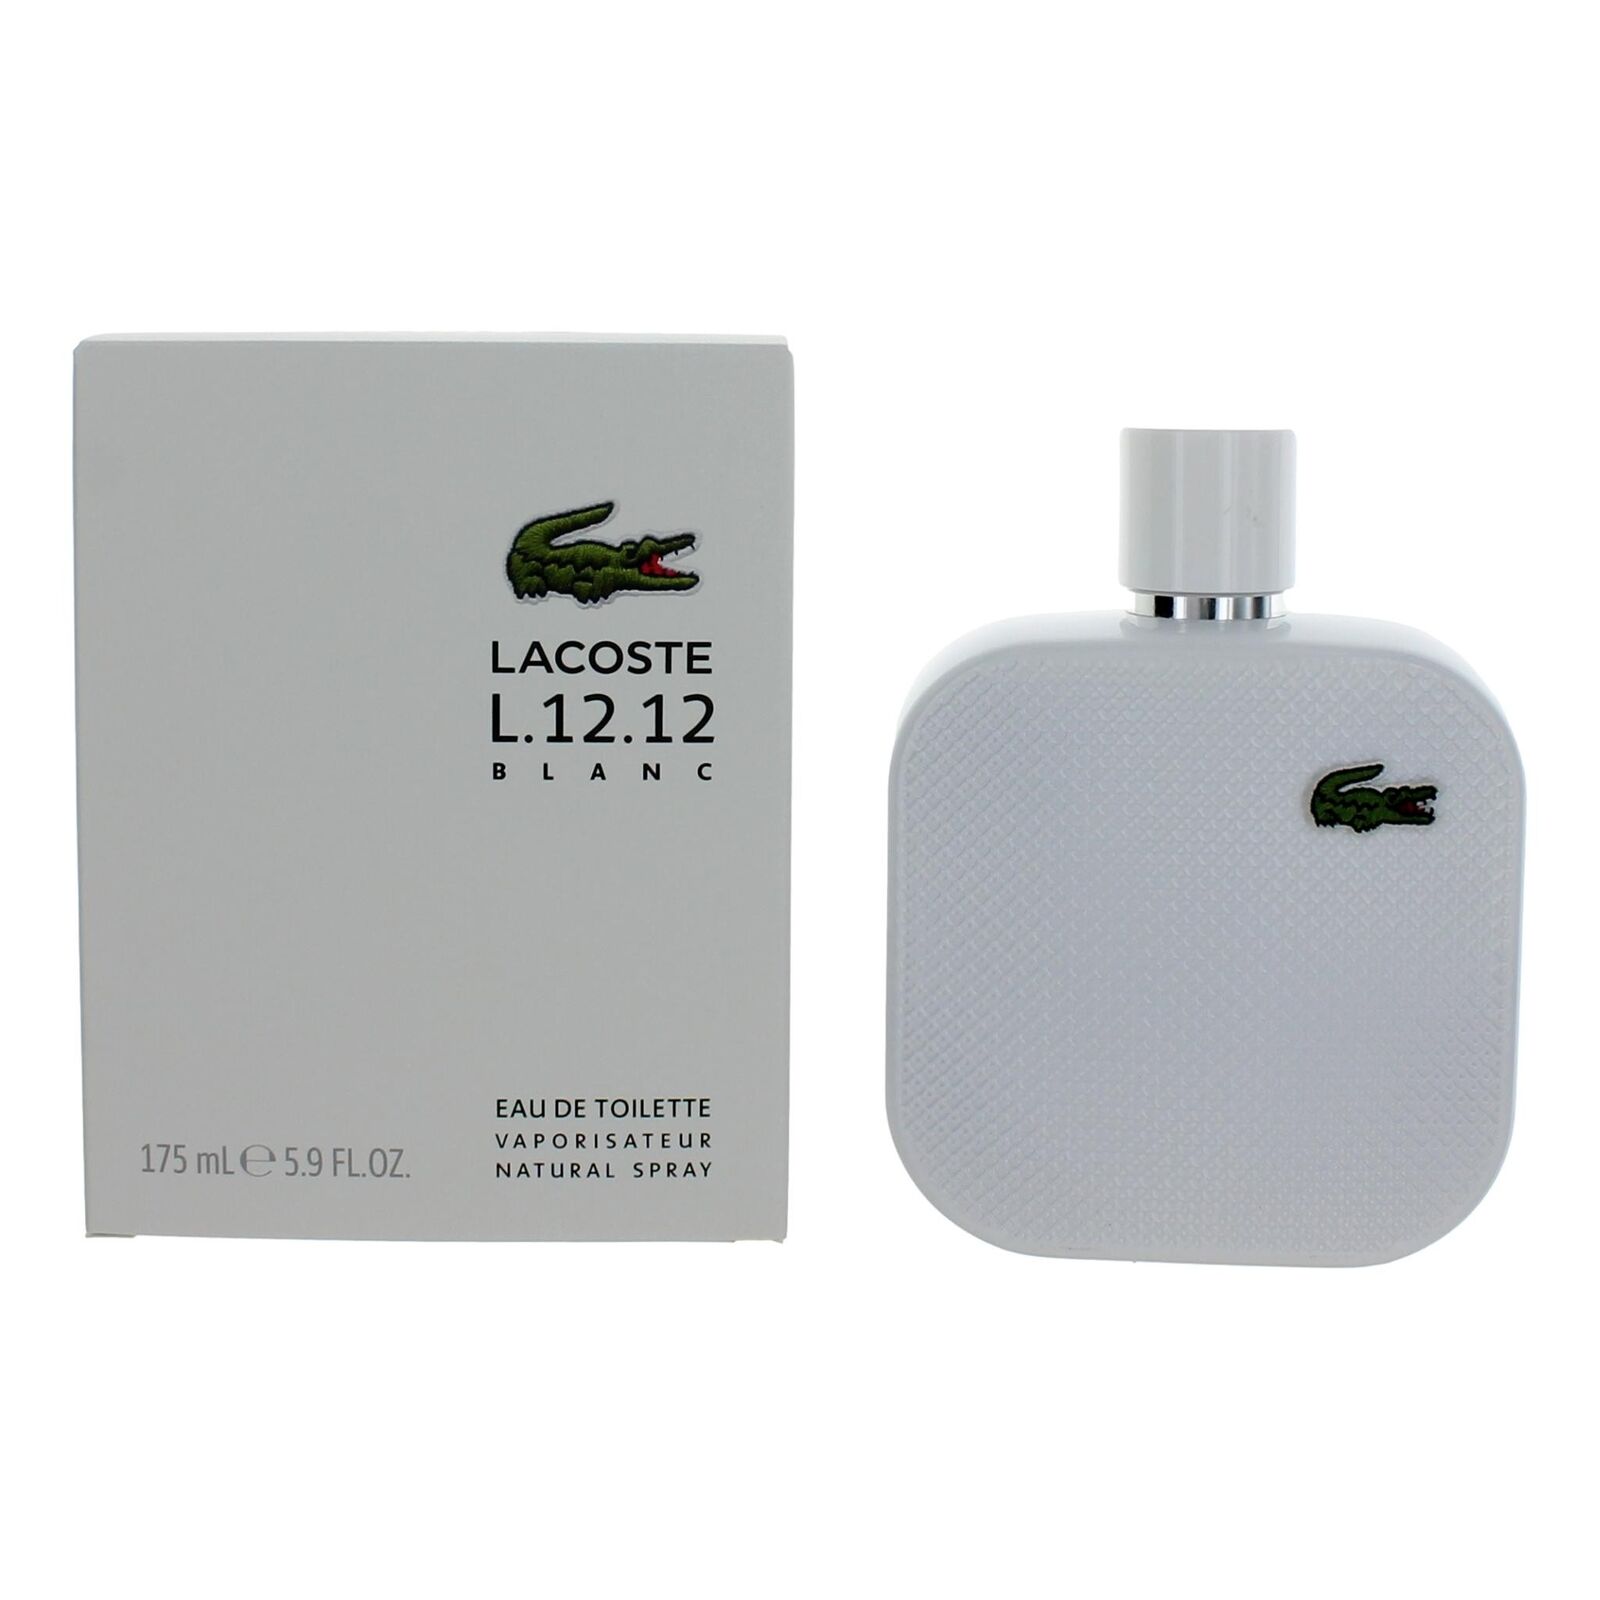 Lacoste L.12.12 White Blanc by Lacoste, 5.9 oz EDT Spray for Men